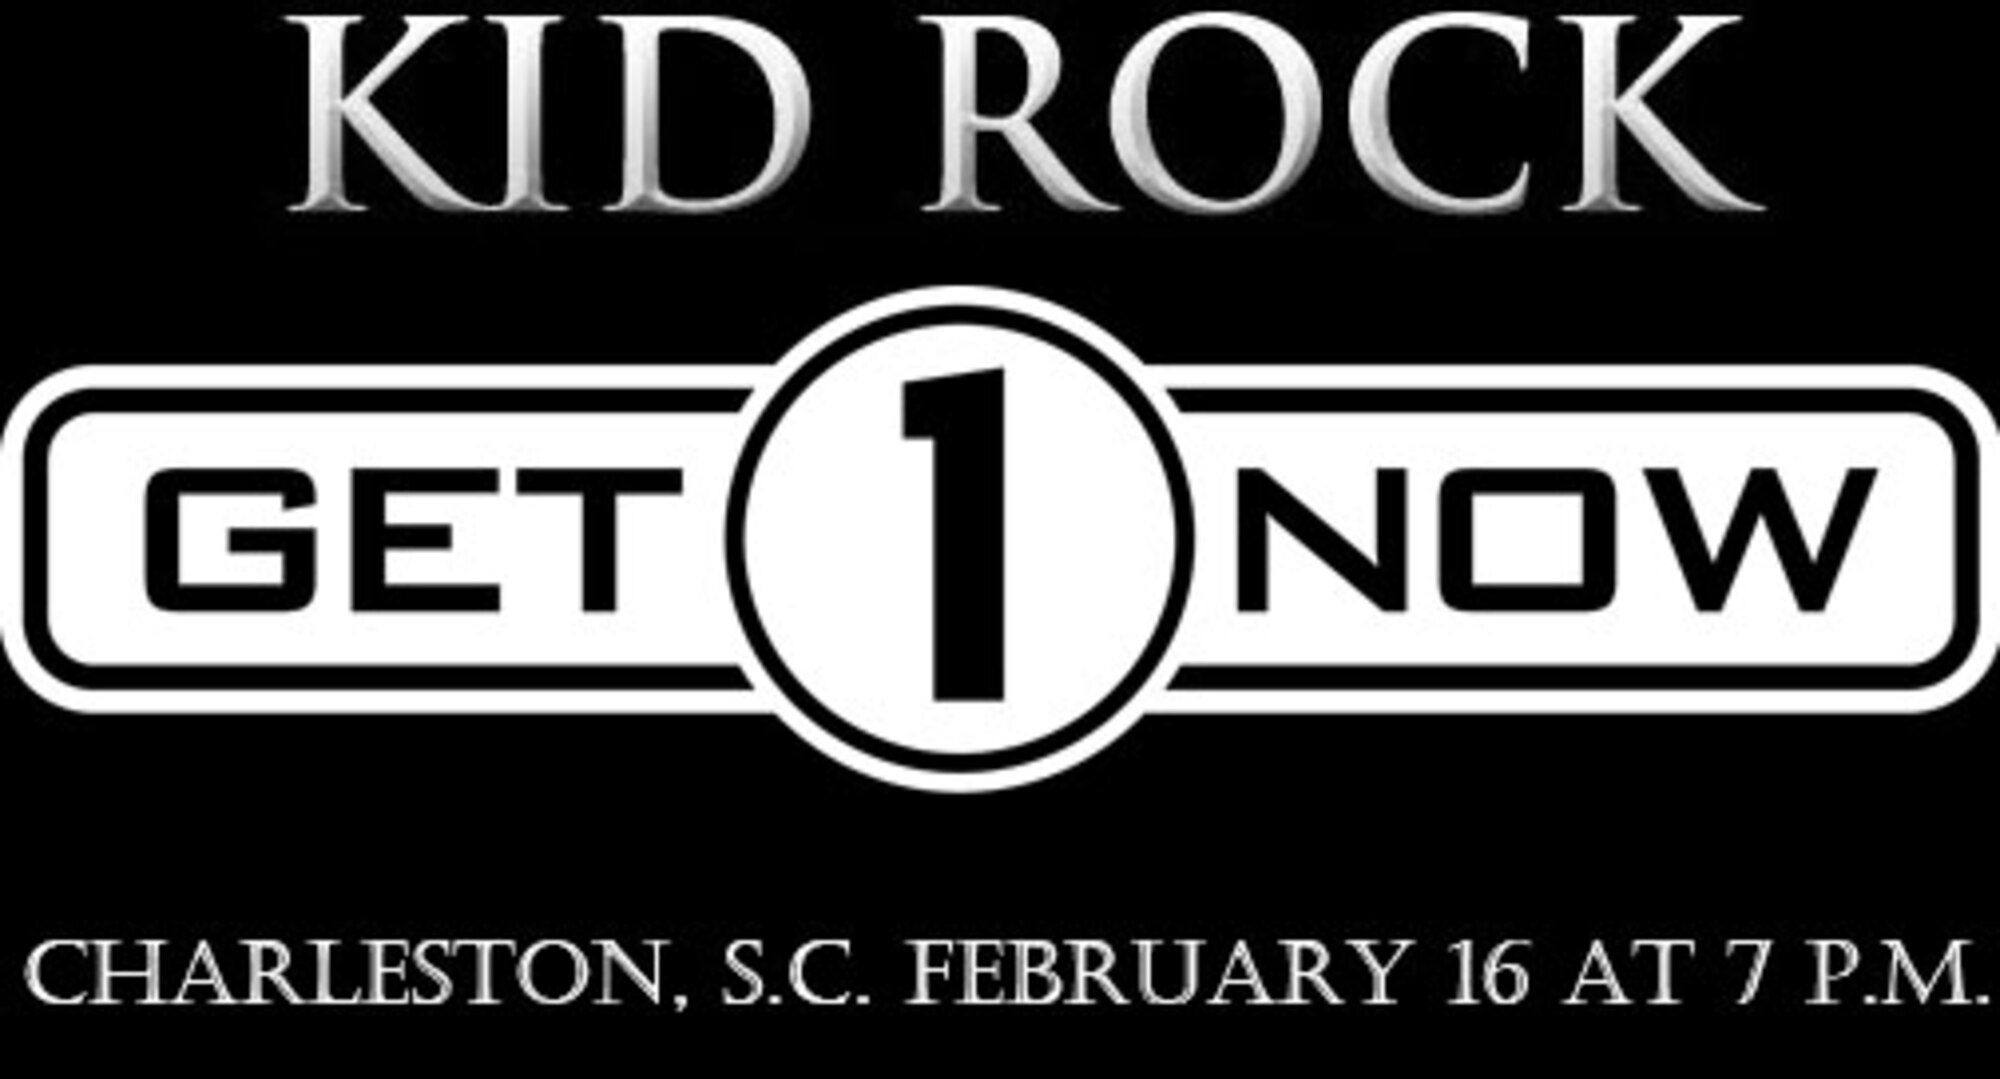 Get 1 Now "Refer a Friend Tour" featuring Kid Rock is scheduled to perform at the North Charleston Coliseum Feb. 16, 2011 at 7 p.m.